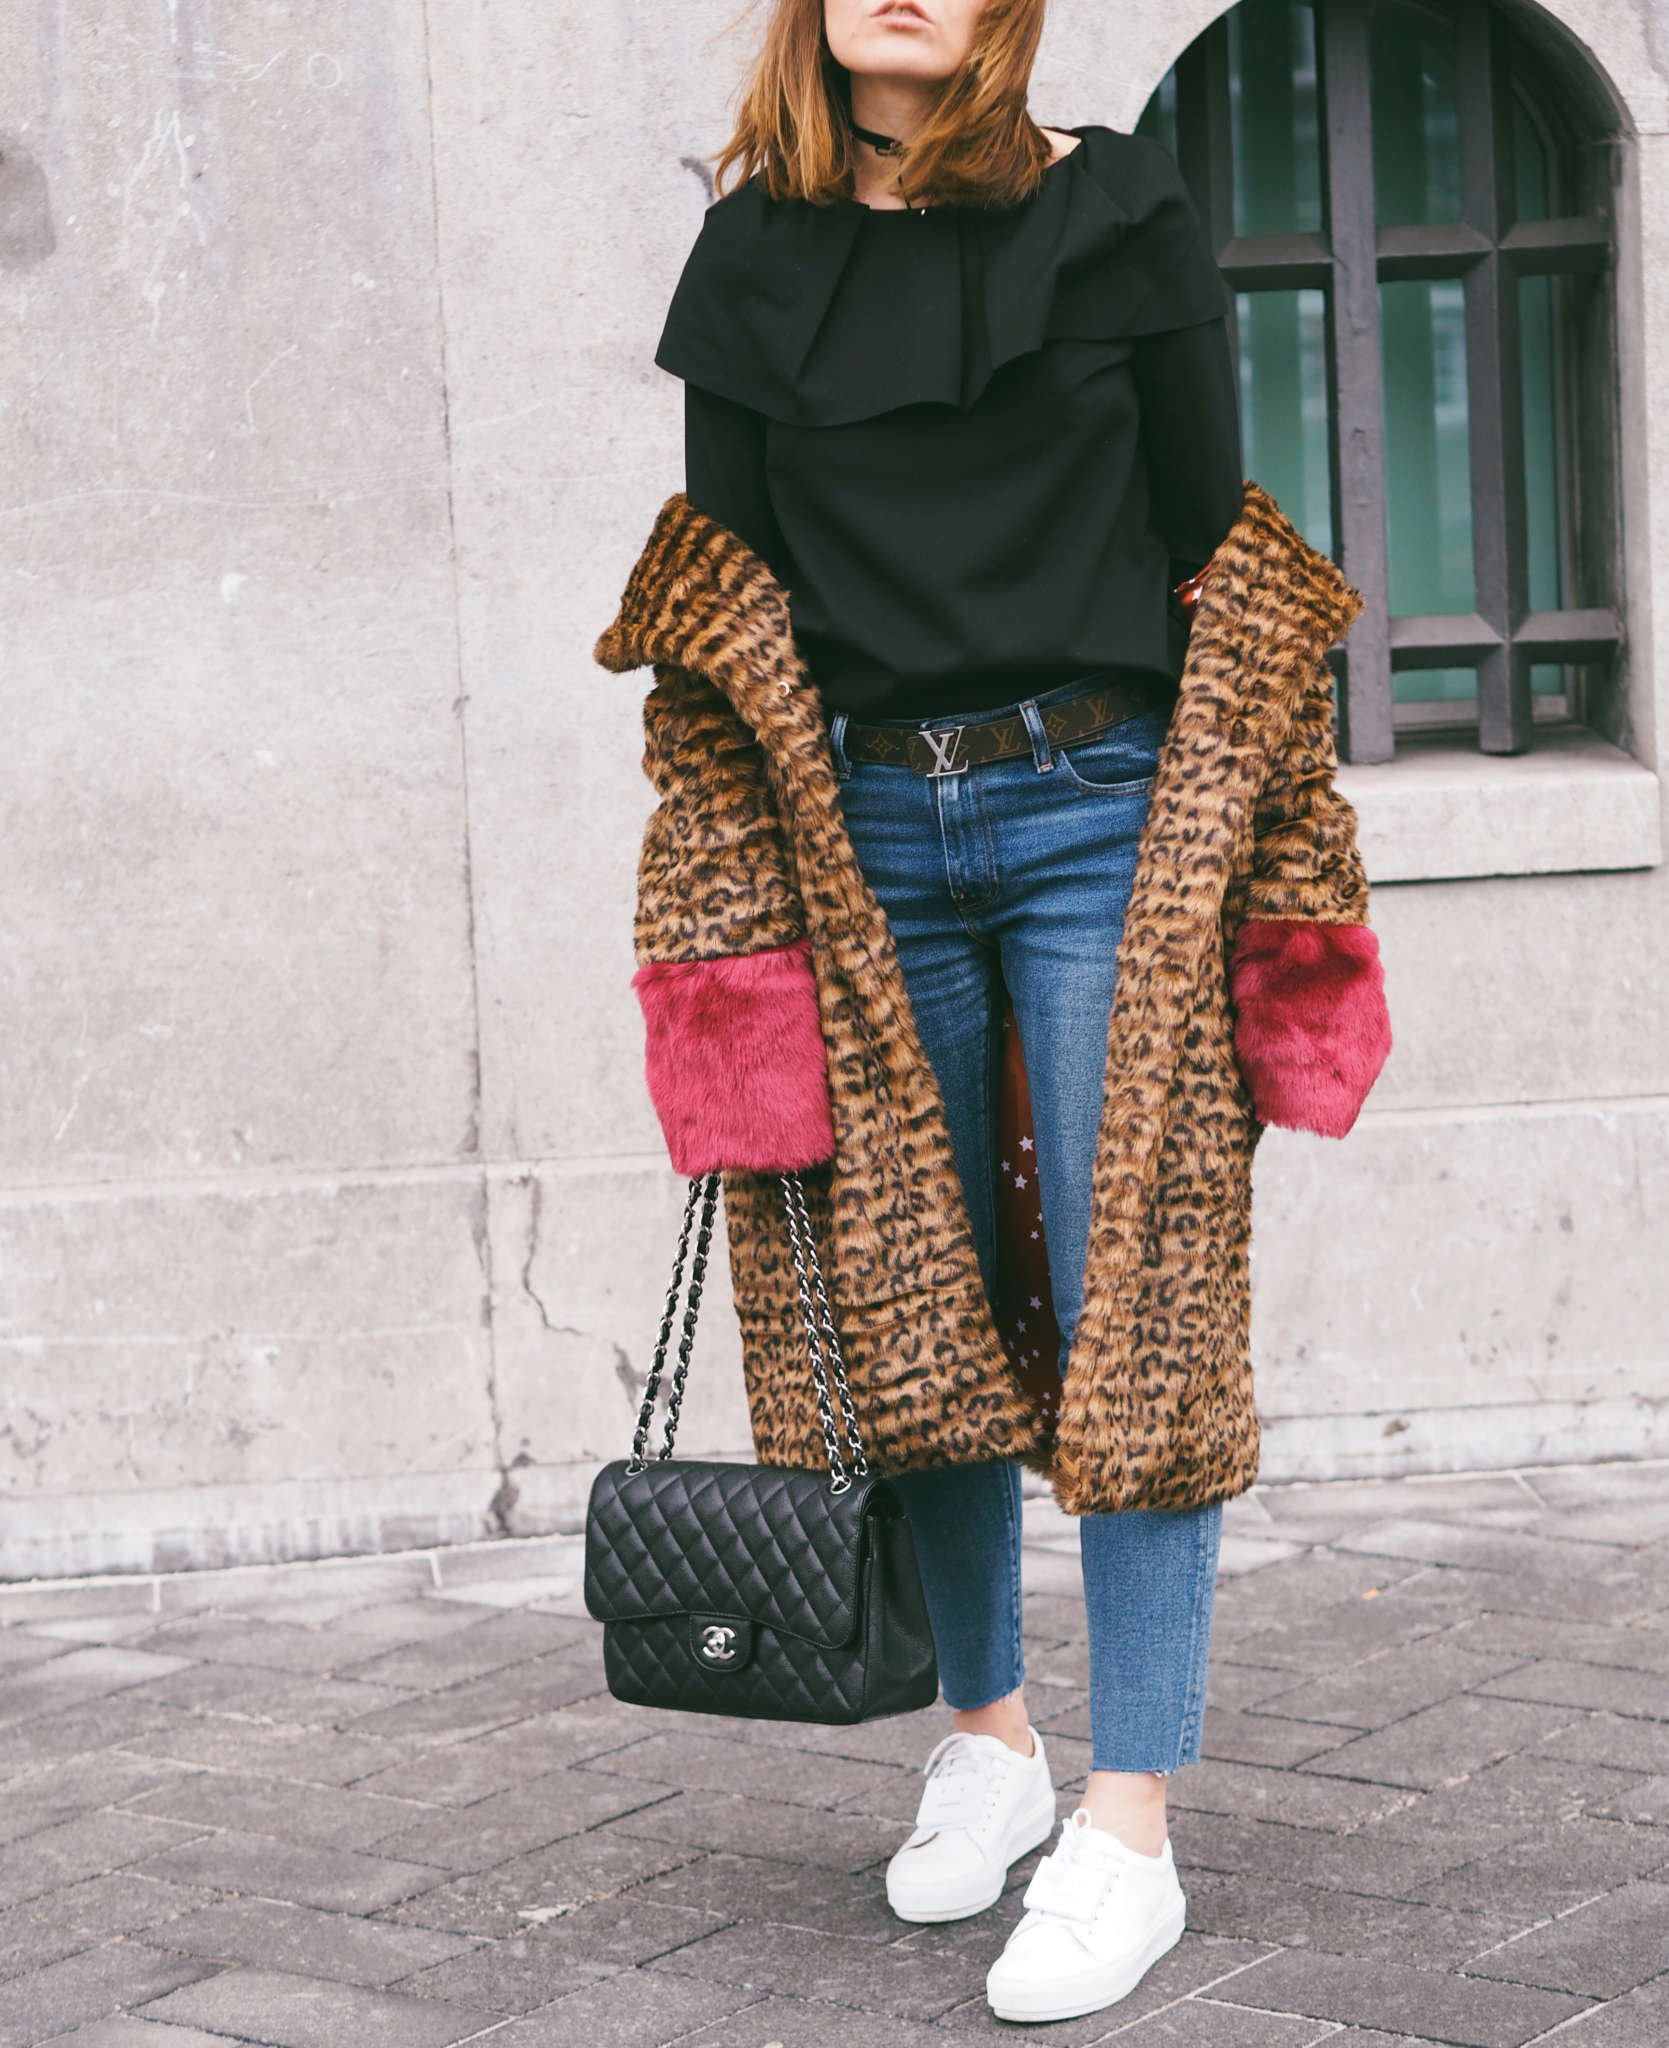 nickyinsideout - leopard print - new year resolutions - fall/winter inspiration - Etsy - faux fur - jacket/coat - street style - Etsy Resolution - full time blogger